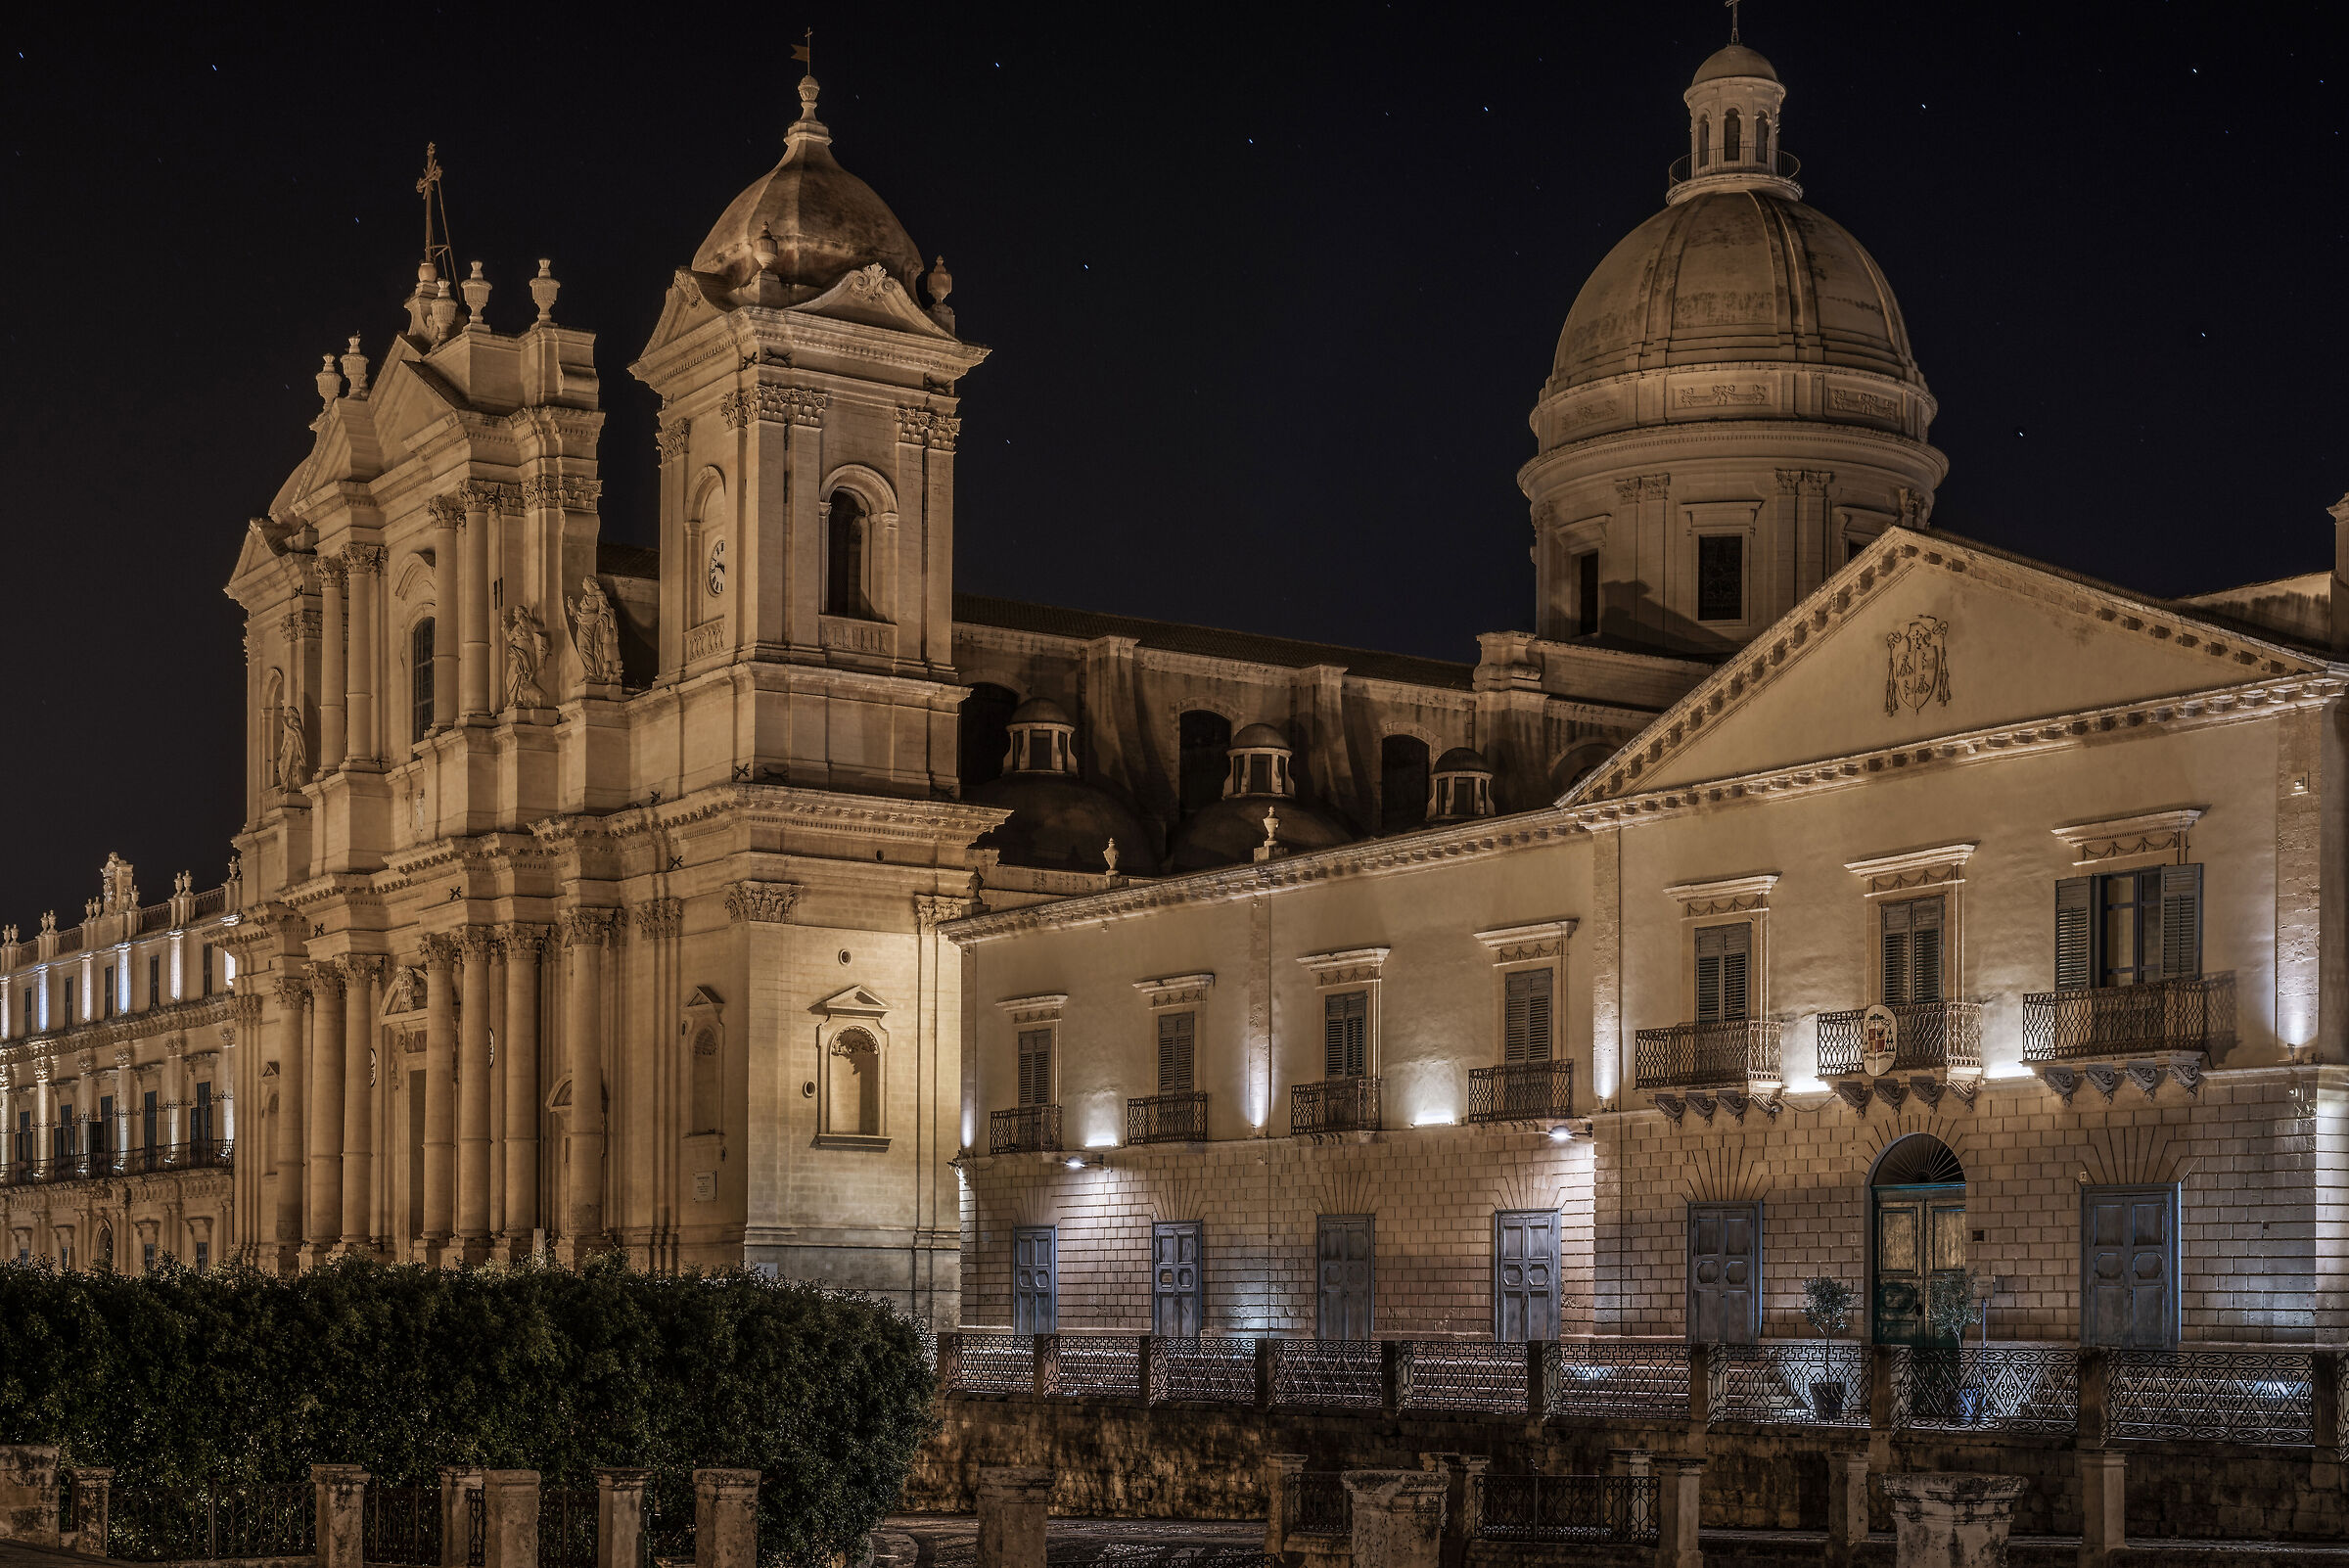 The cathedrals of Noto...